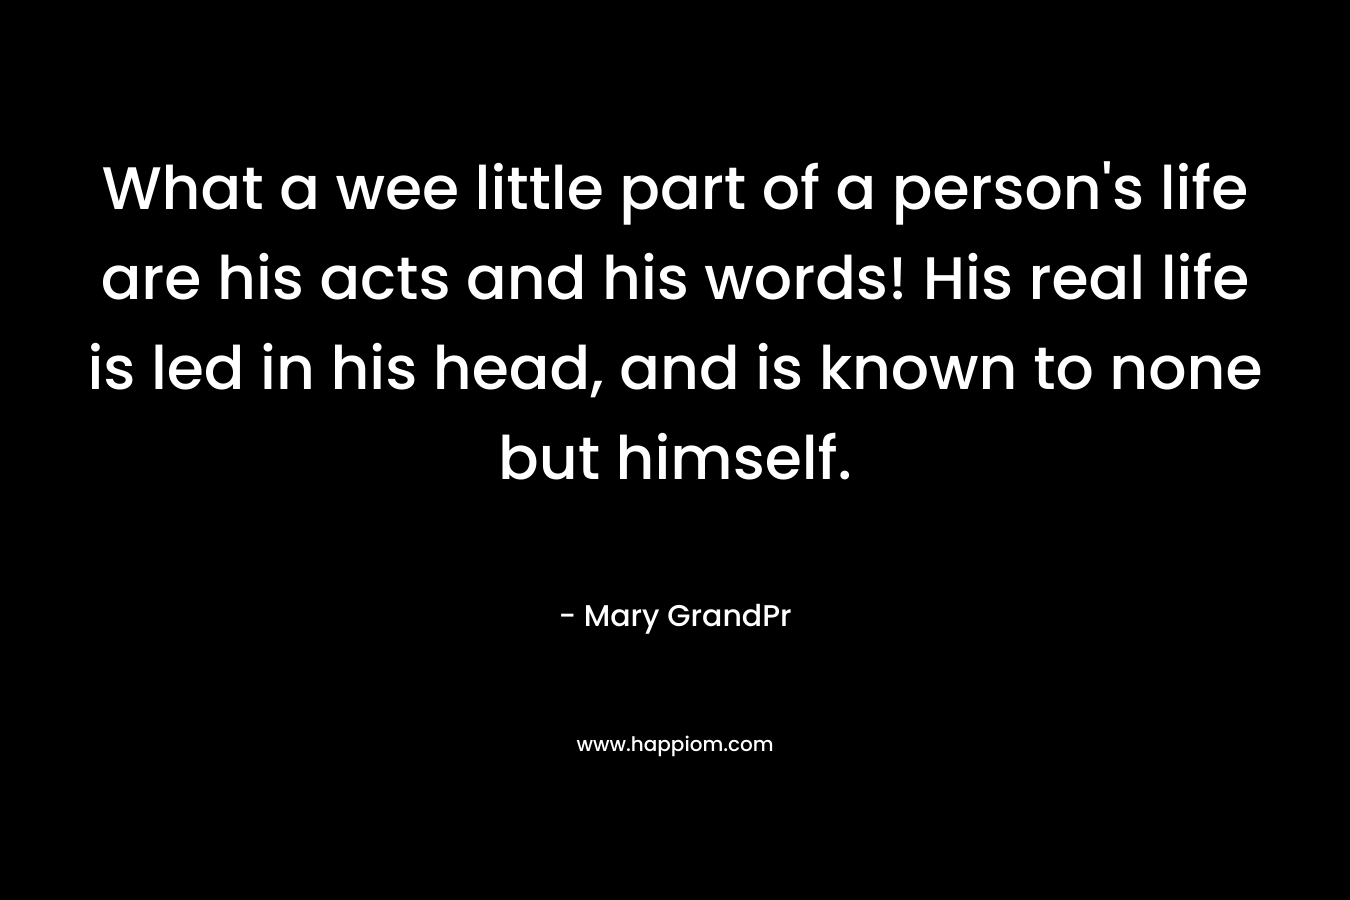 What a wee little part of a person’s life are his acts and his words! His real life is led in his head, and is known to none but himself. – Mary GrandPr